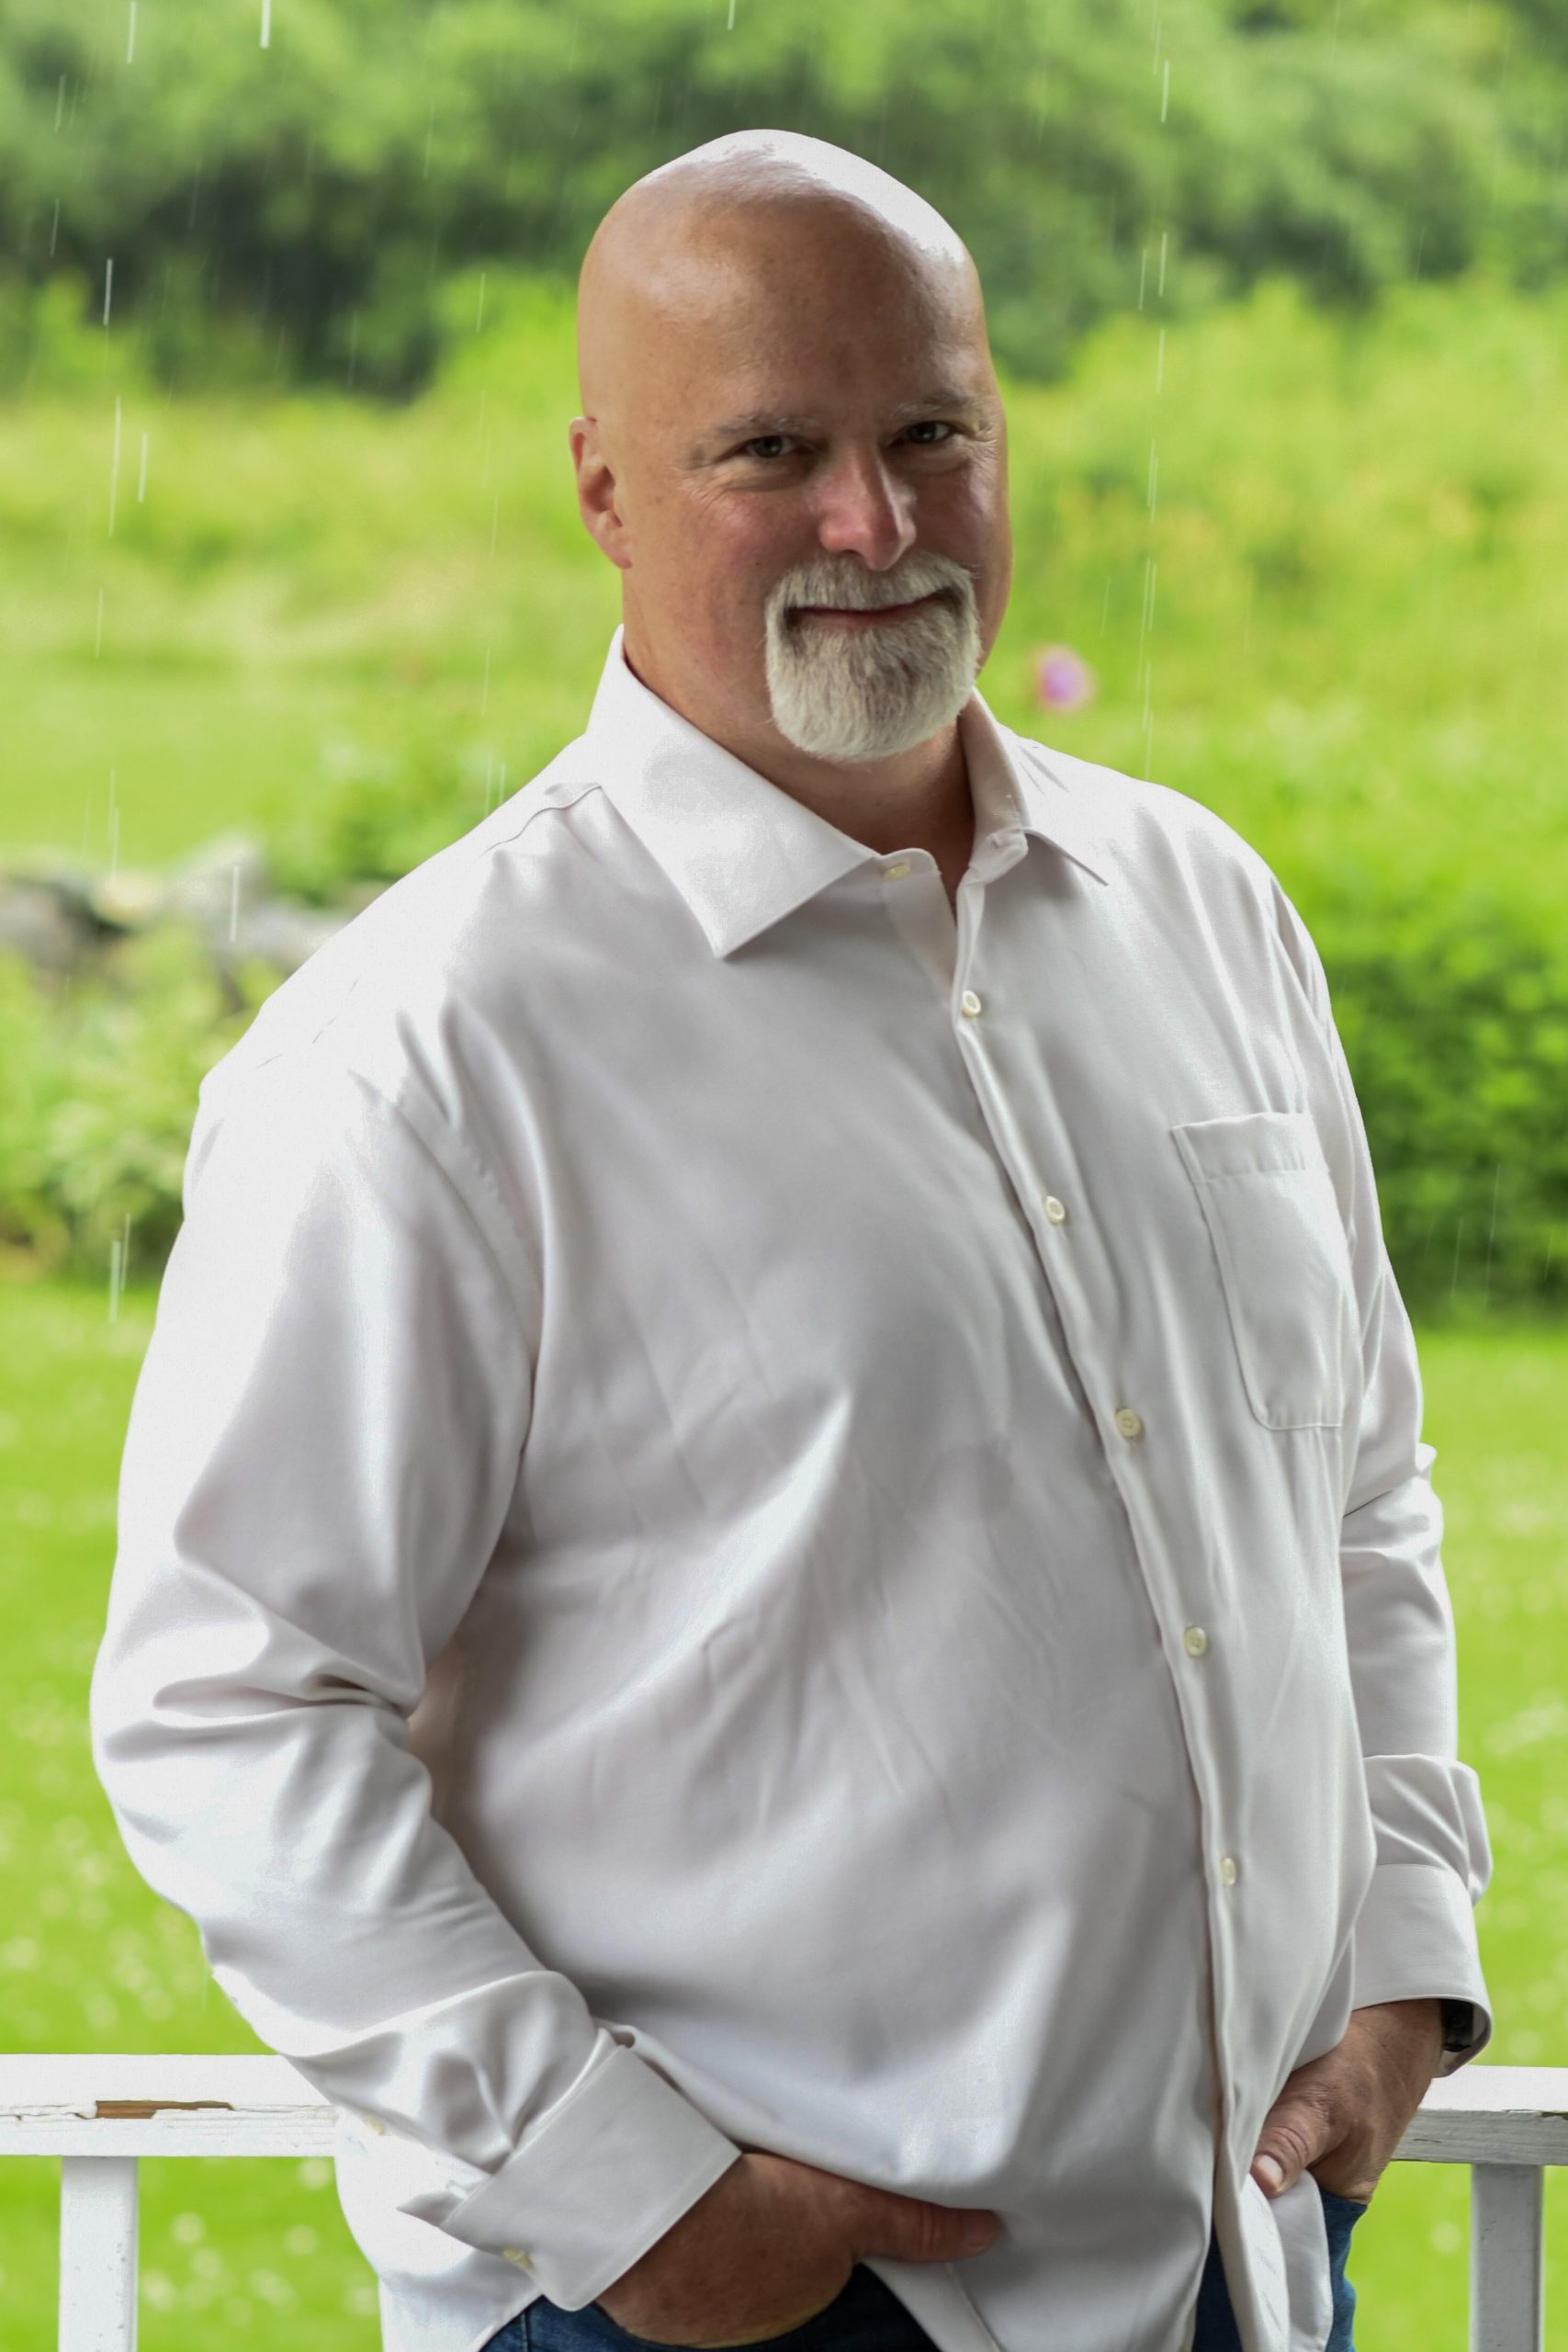 Image of Tim Young standing outdoors wearing a white button-down shirt.